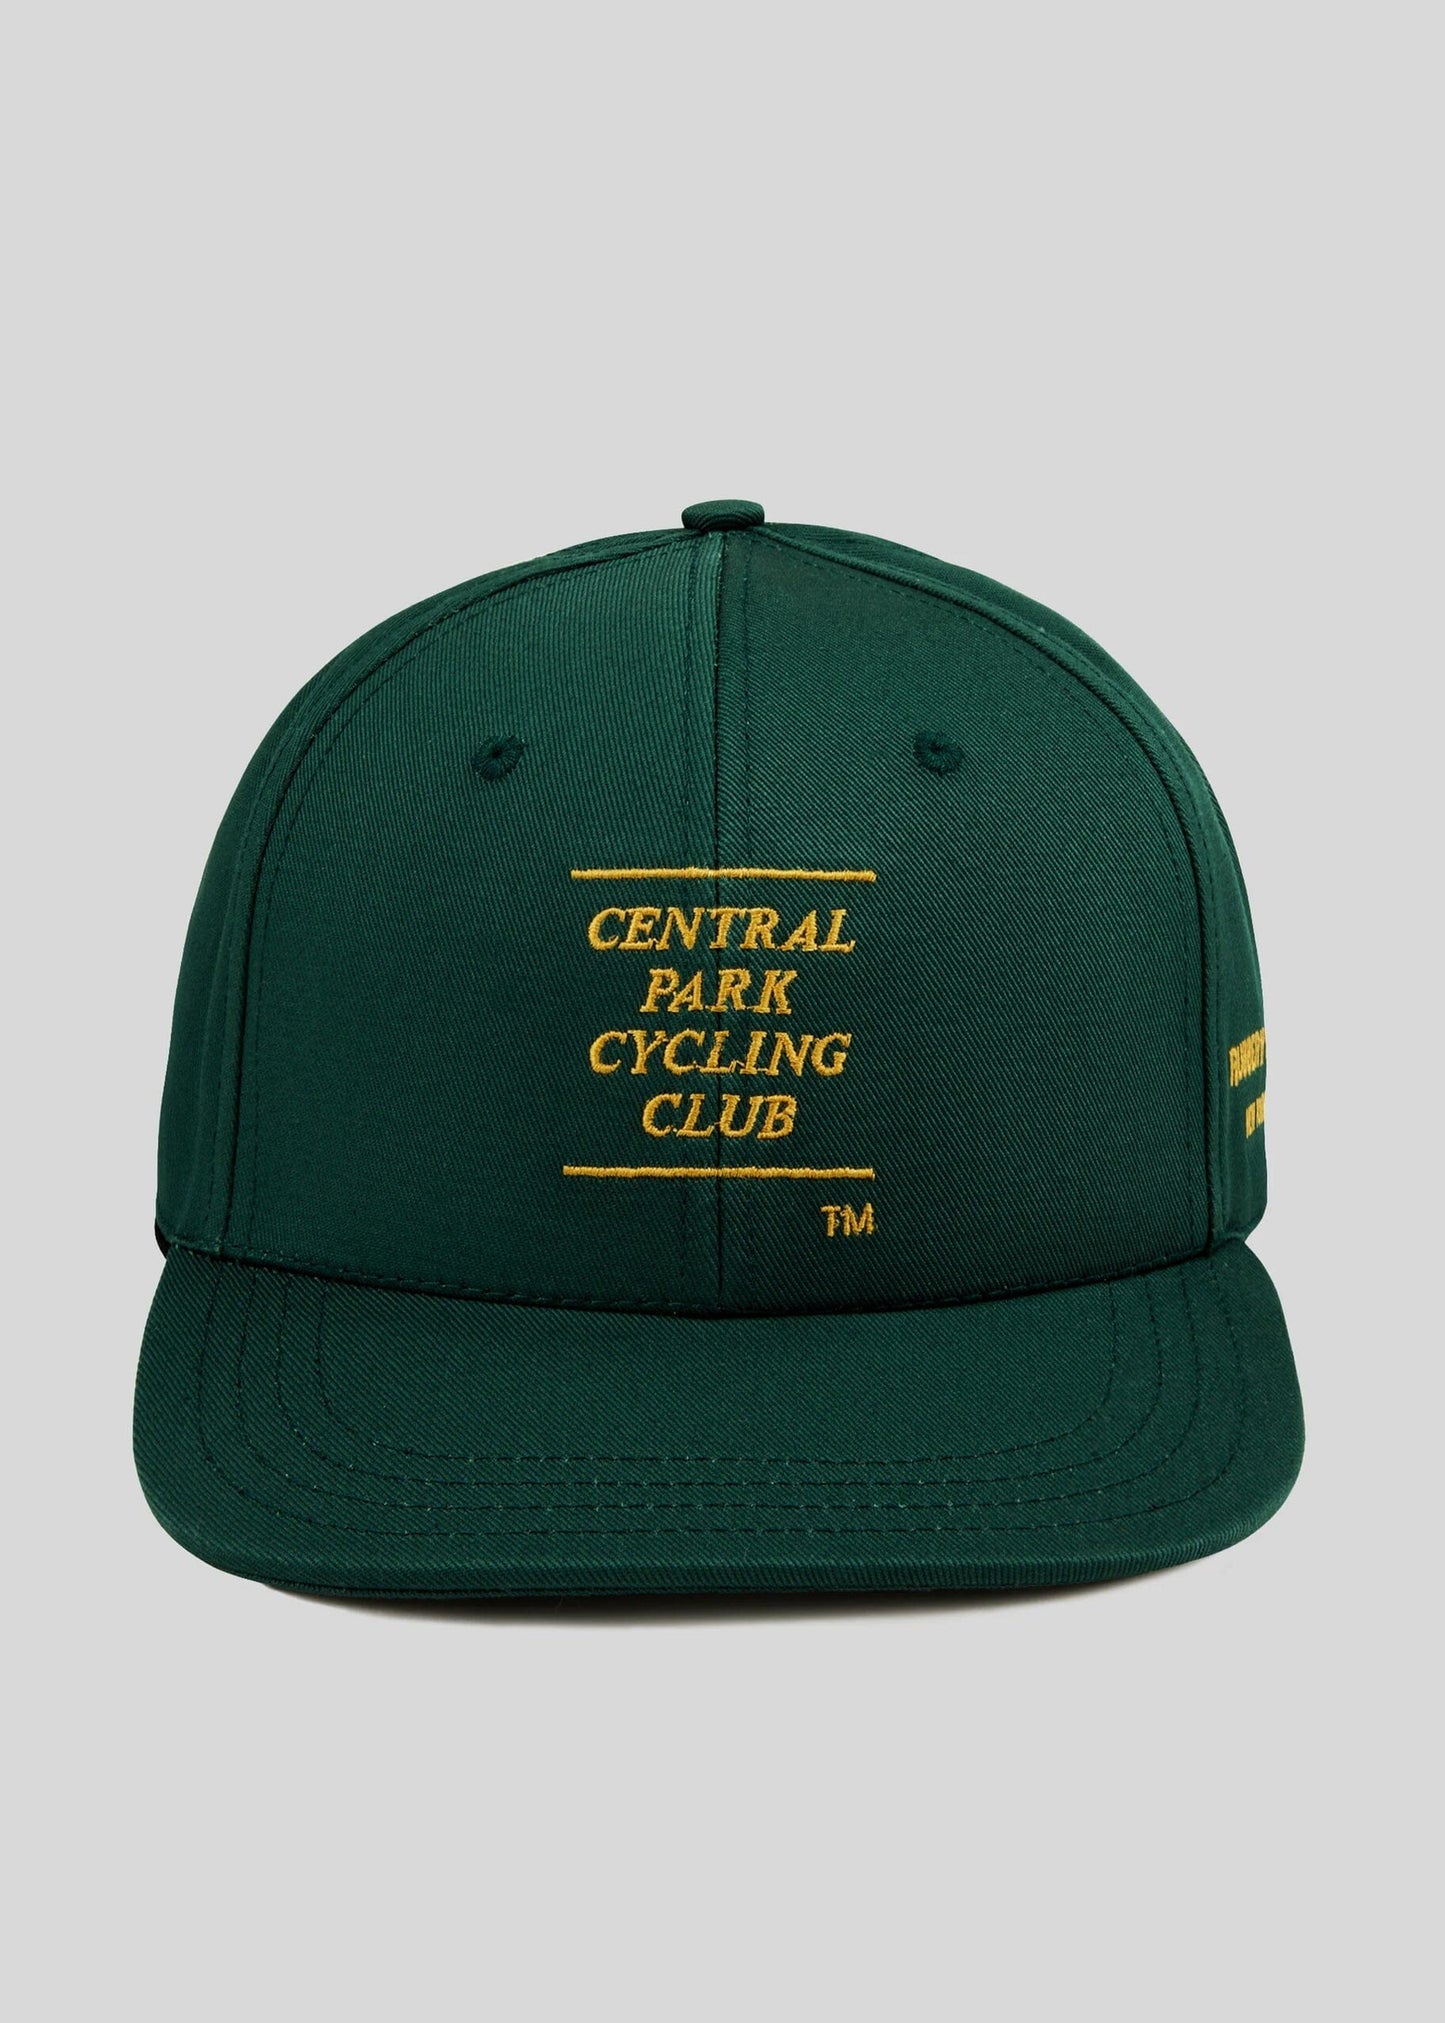 Rubber N' Road - Central Park Cycling Club Cap Rubber N' Road Casual Caps 